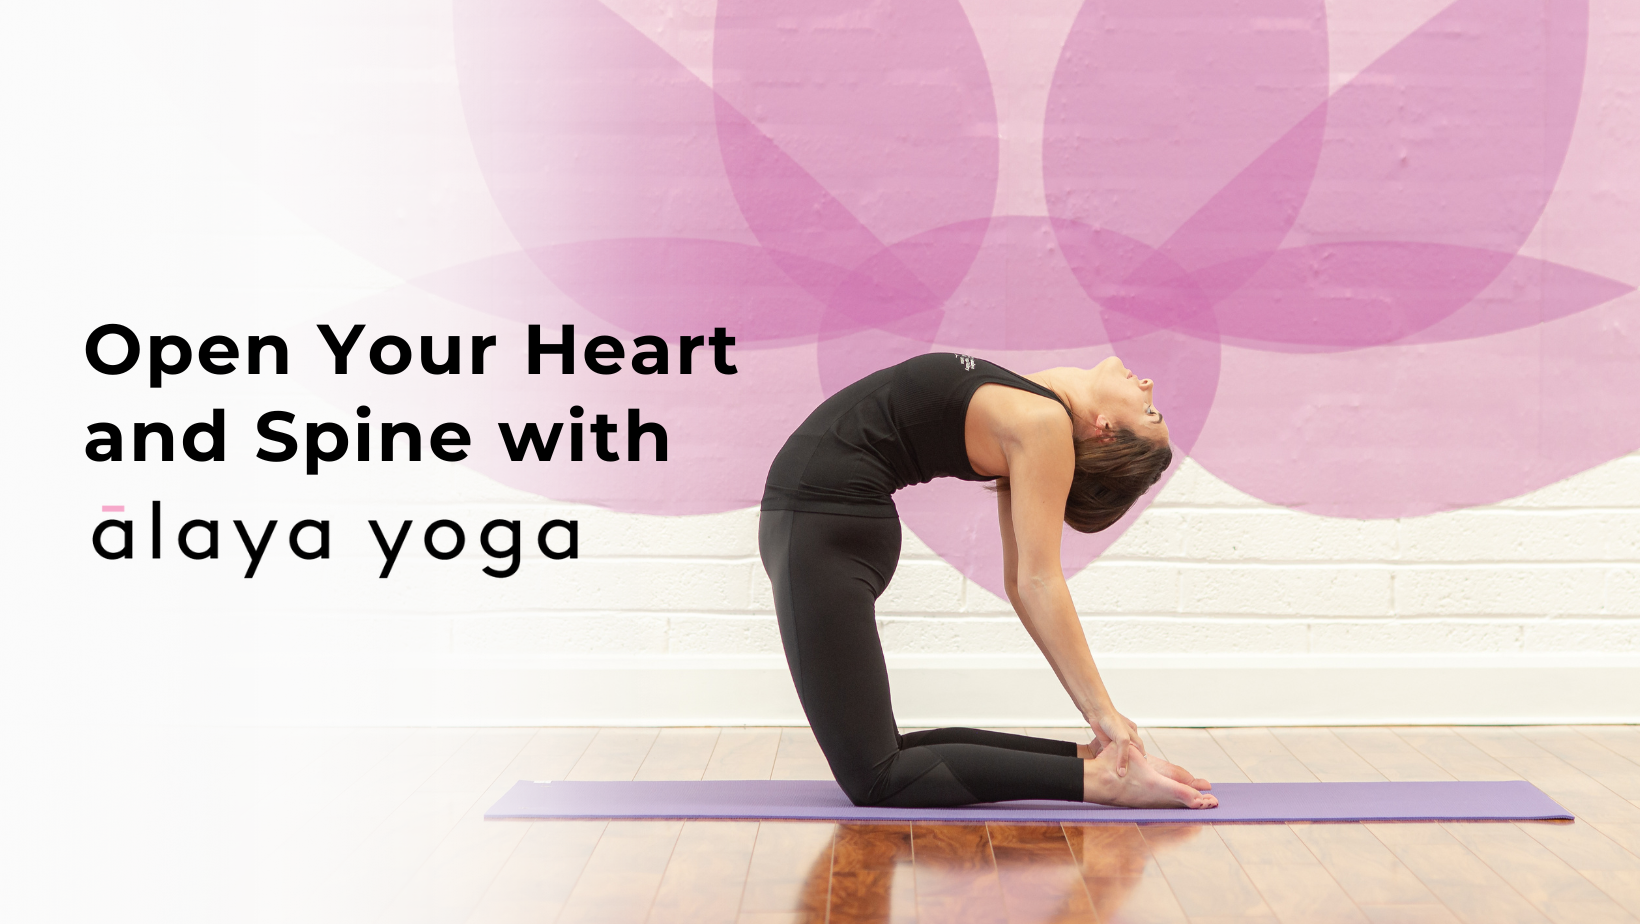 Open the Heart and Spine Yoga with Alaya Yoga